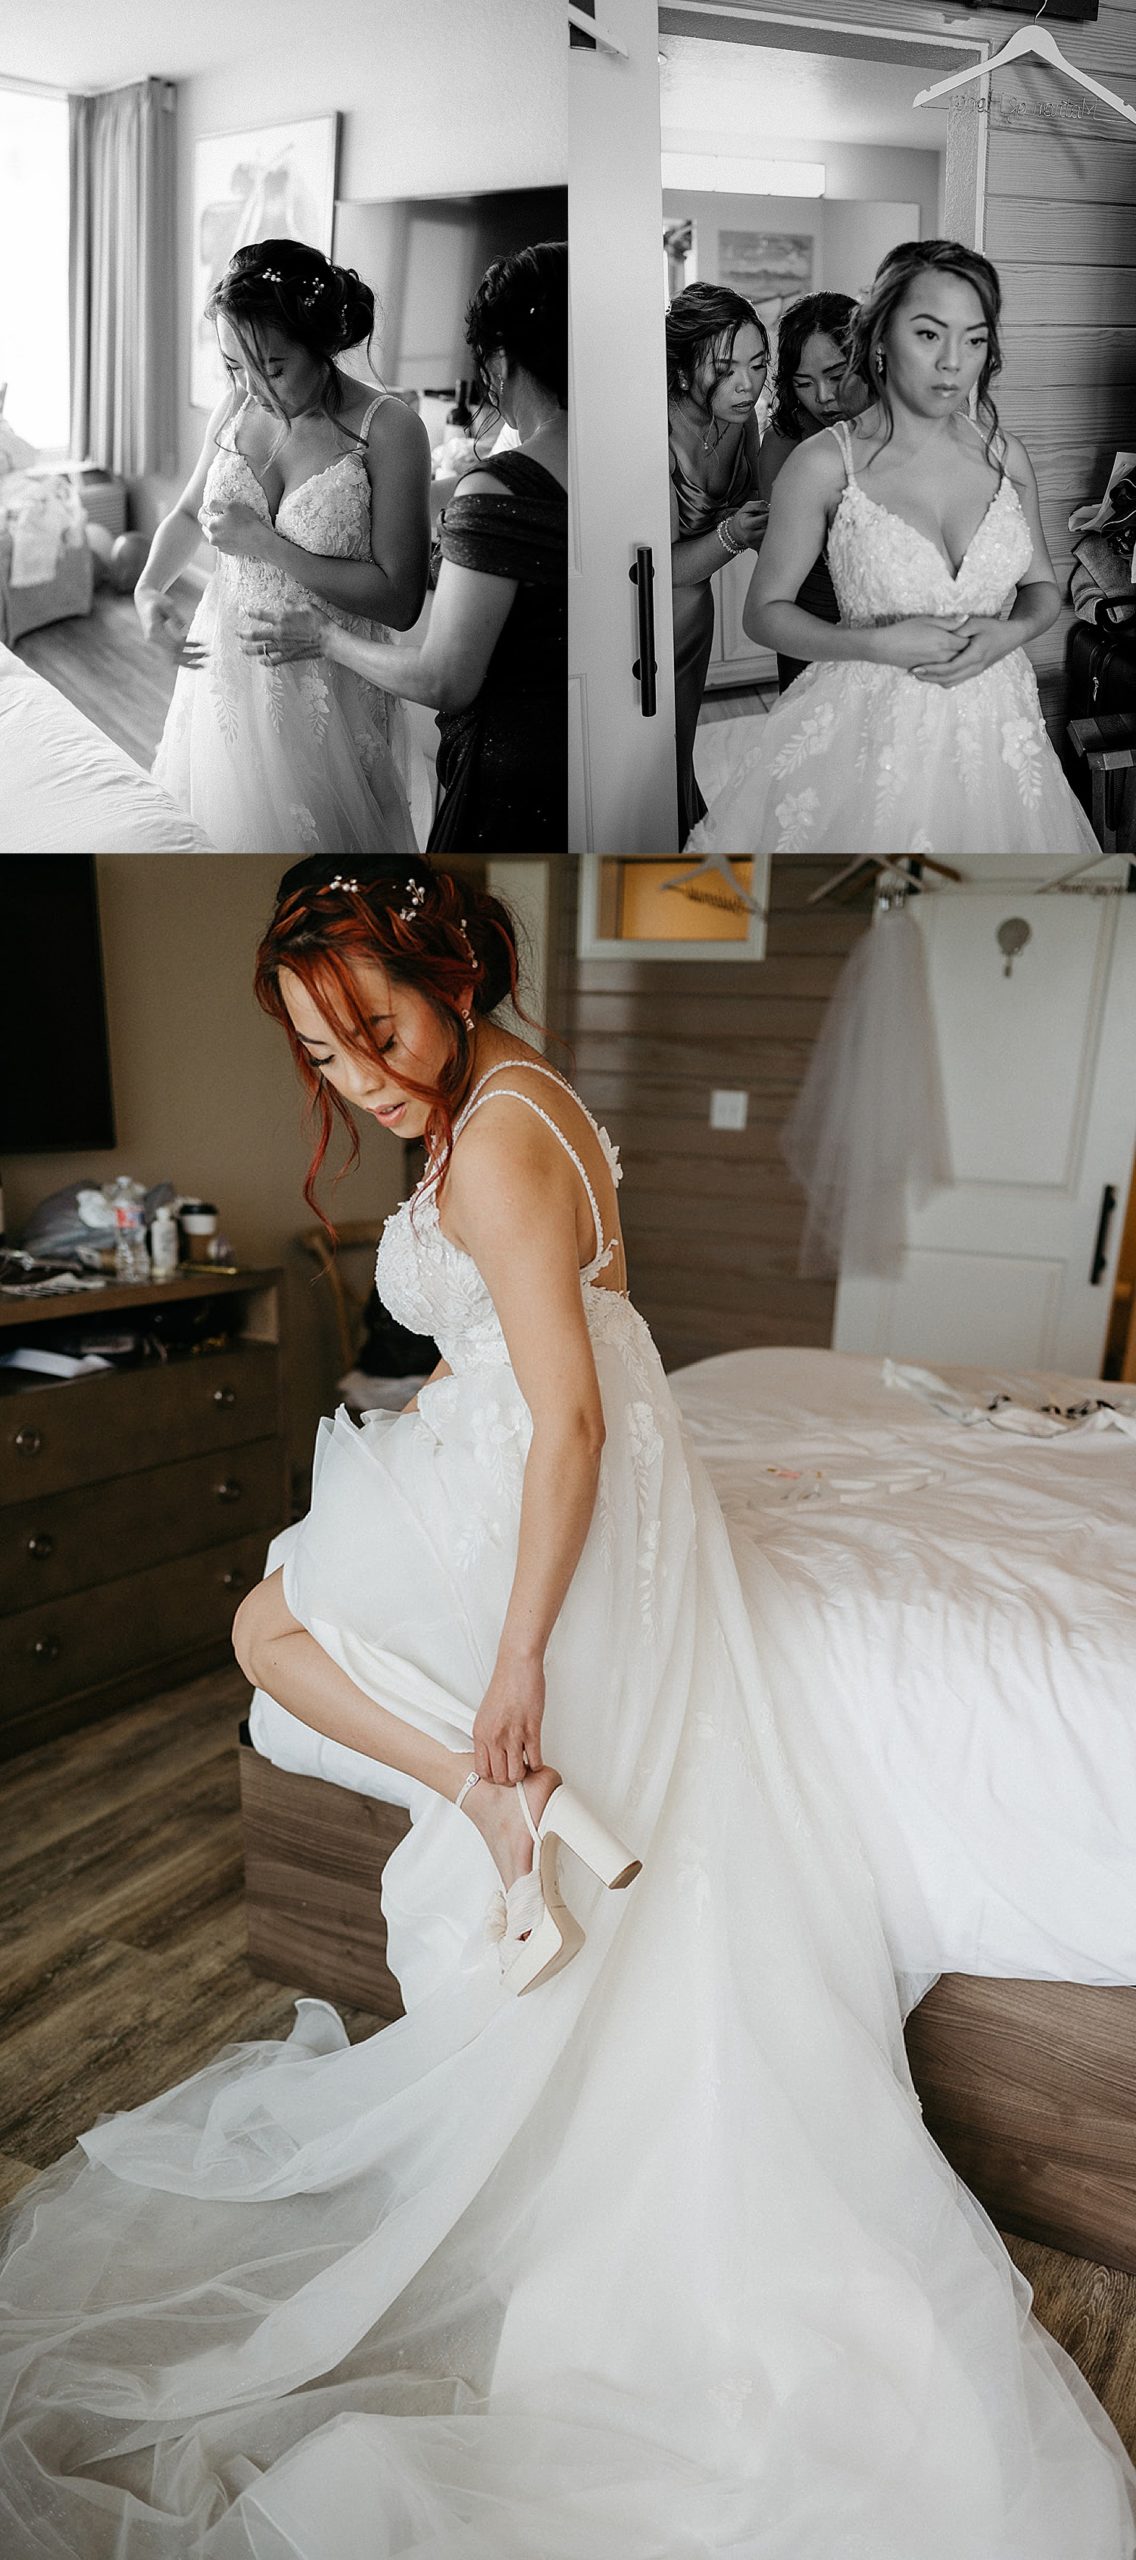 Bride putting on heels after putting on white long wedding dress